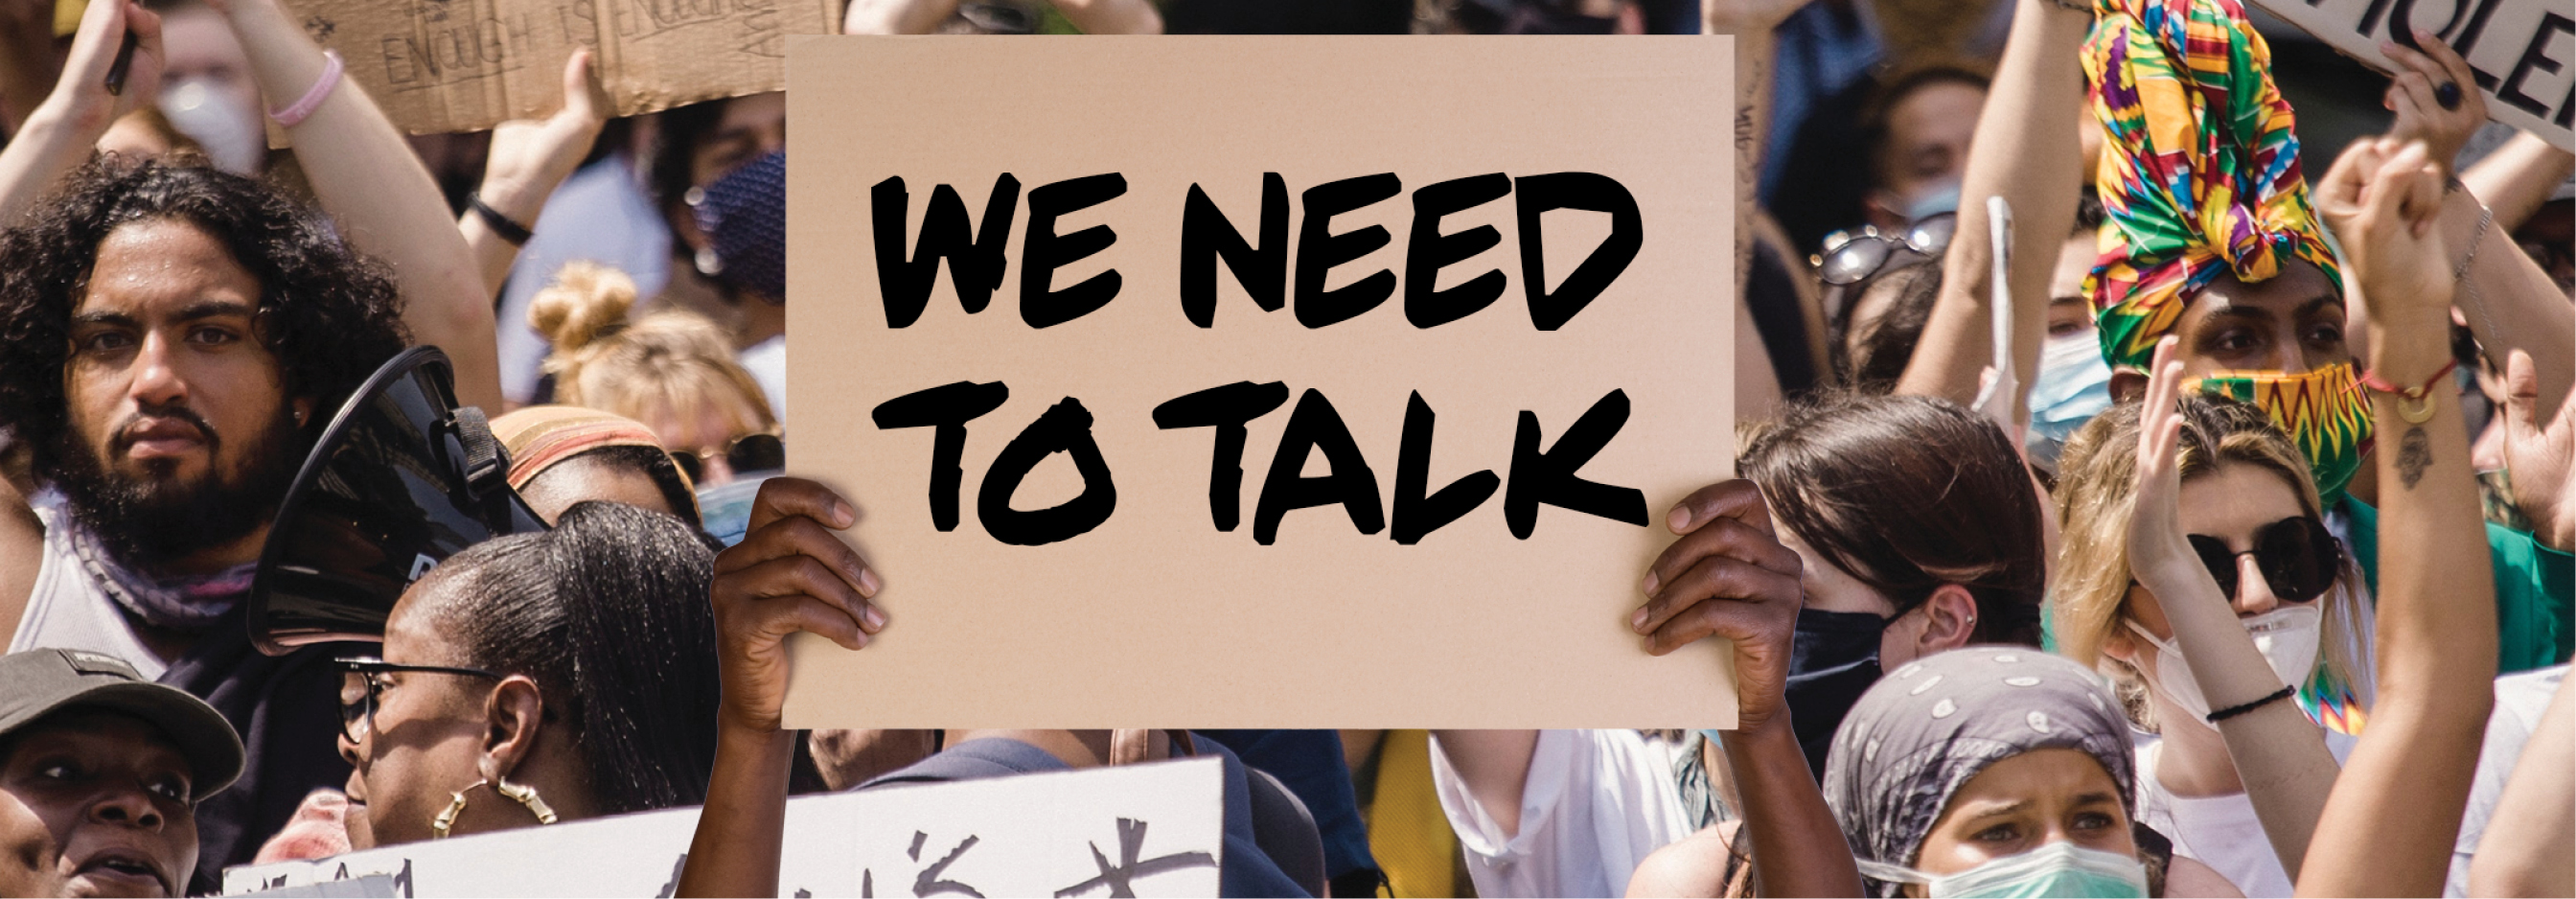 We Need To Talk: Conversations on Racism for a More Resilient Las Vegas, Episode 2: We Need To Talk About Criminal Justice